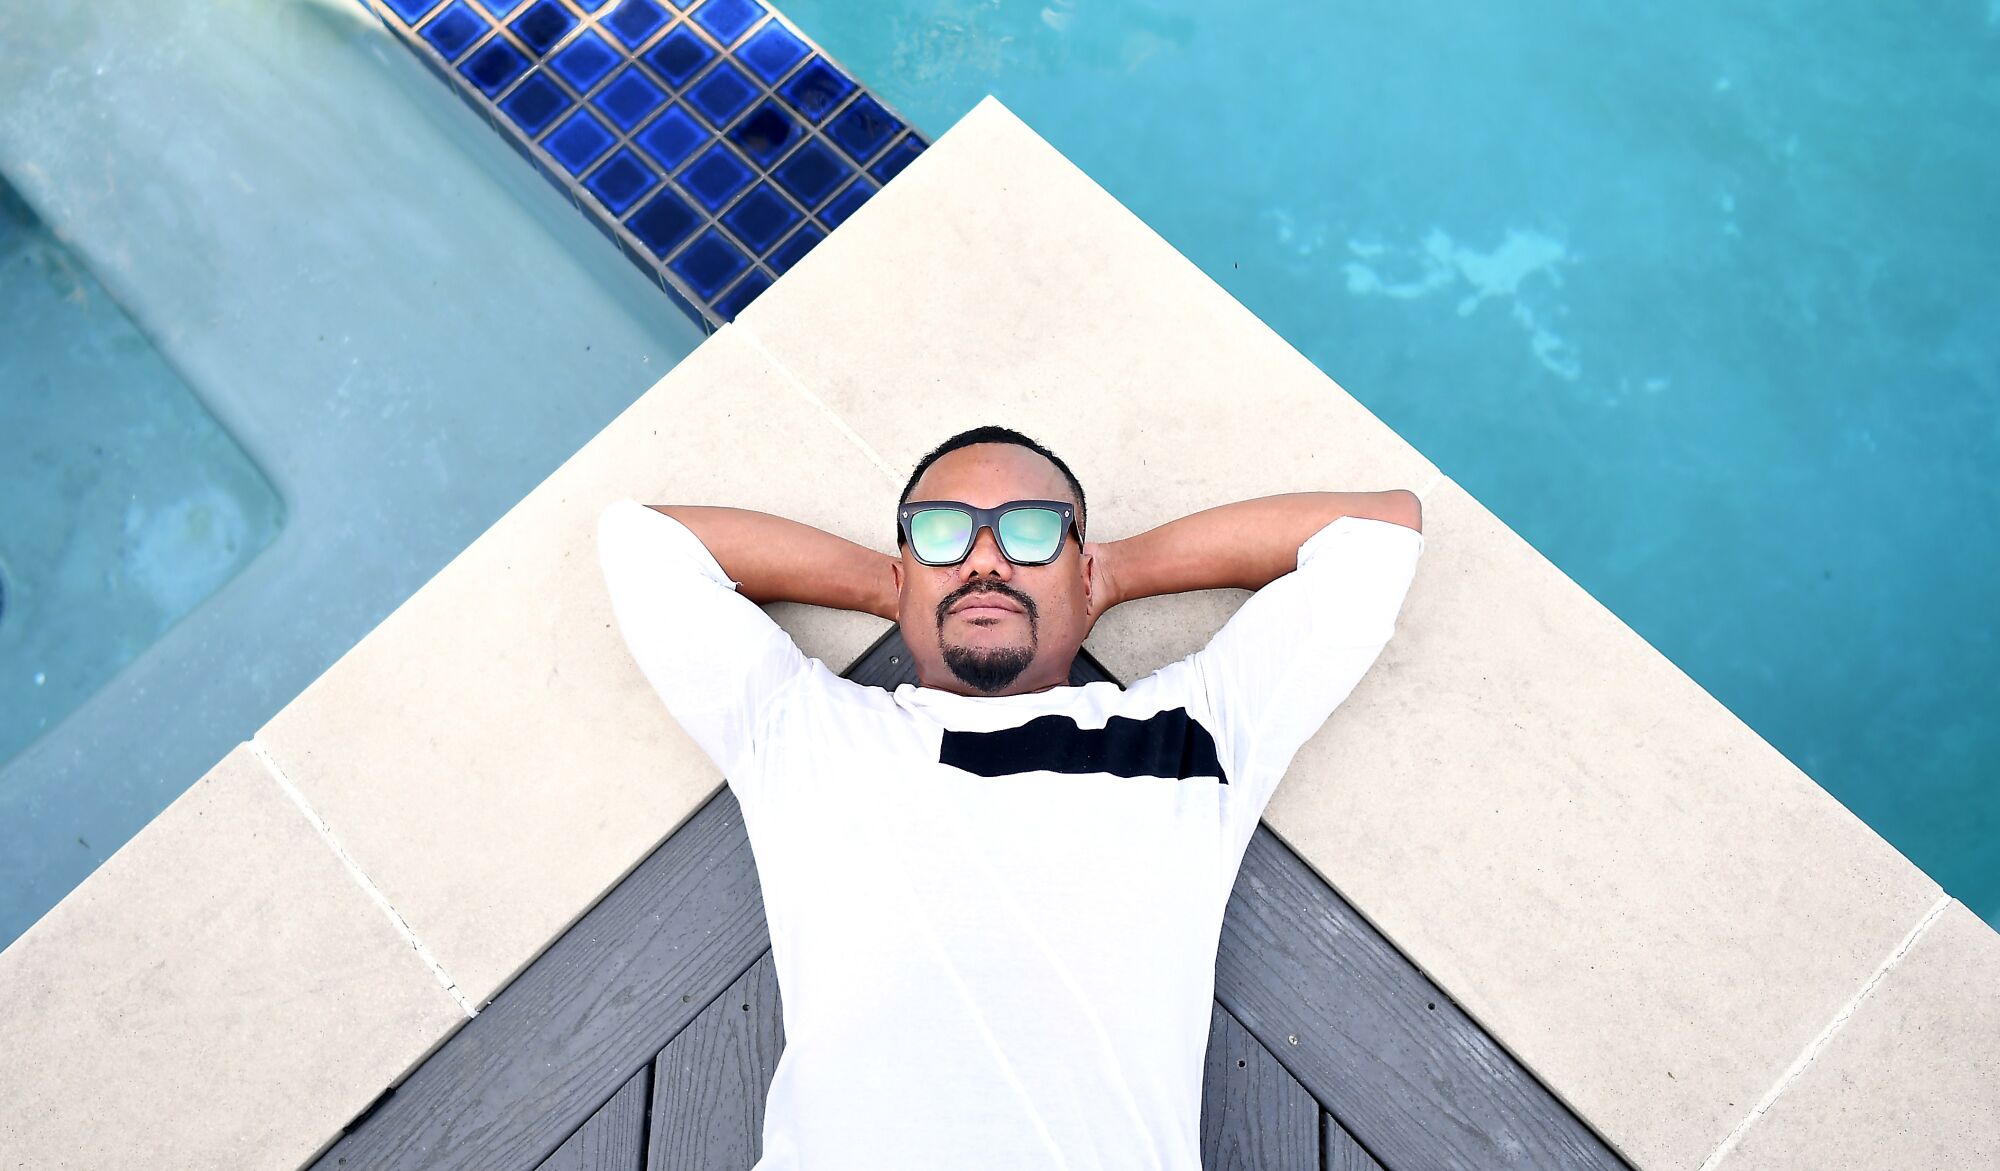 Apl.de.Ap of the Black Eyed Peas by his pool in the Valley.